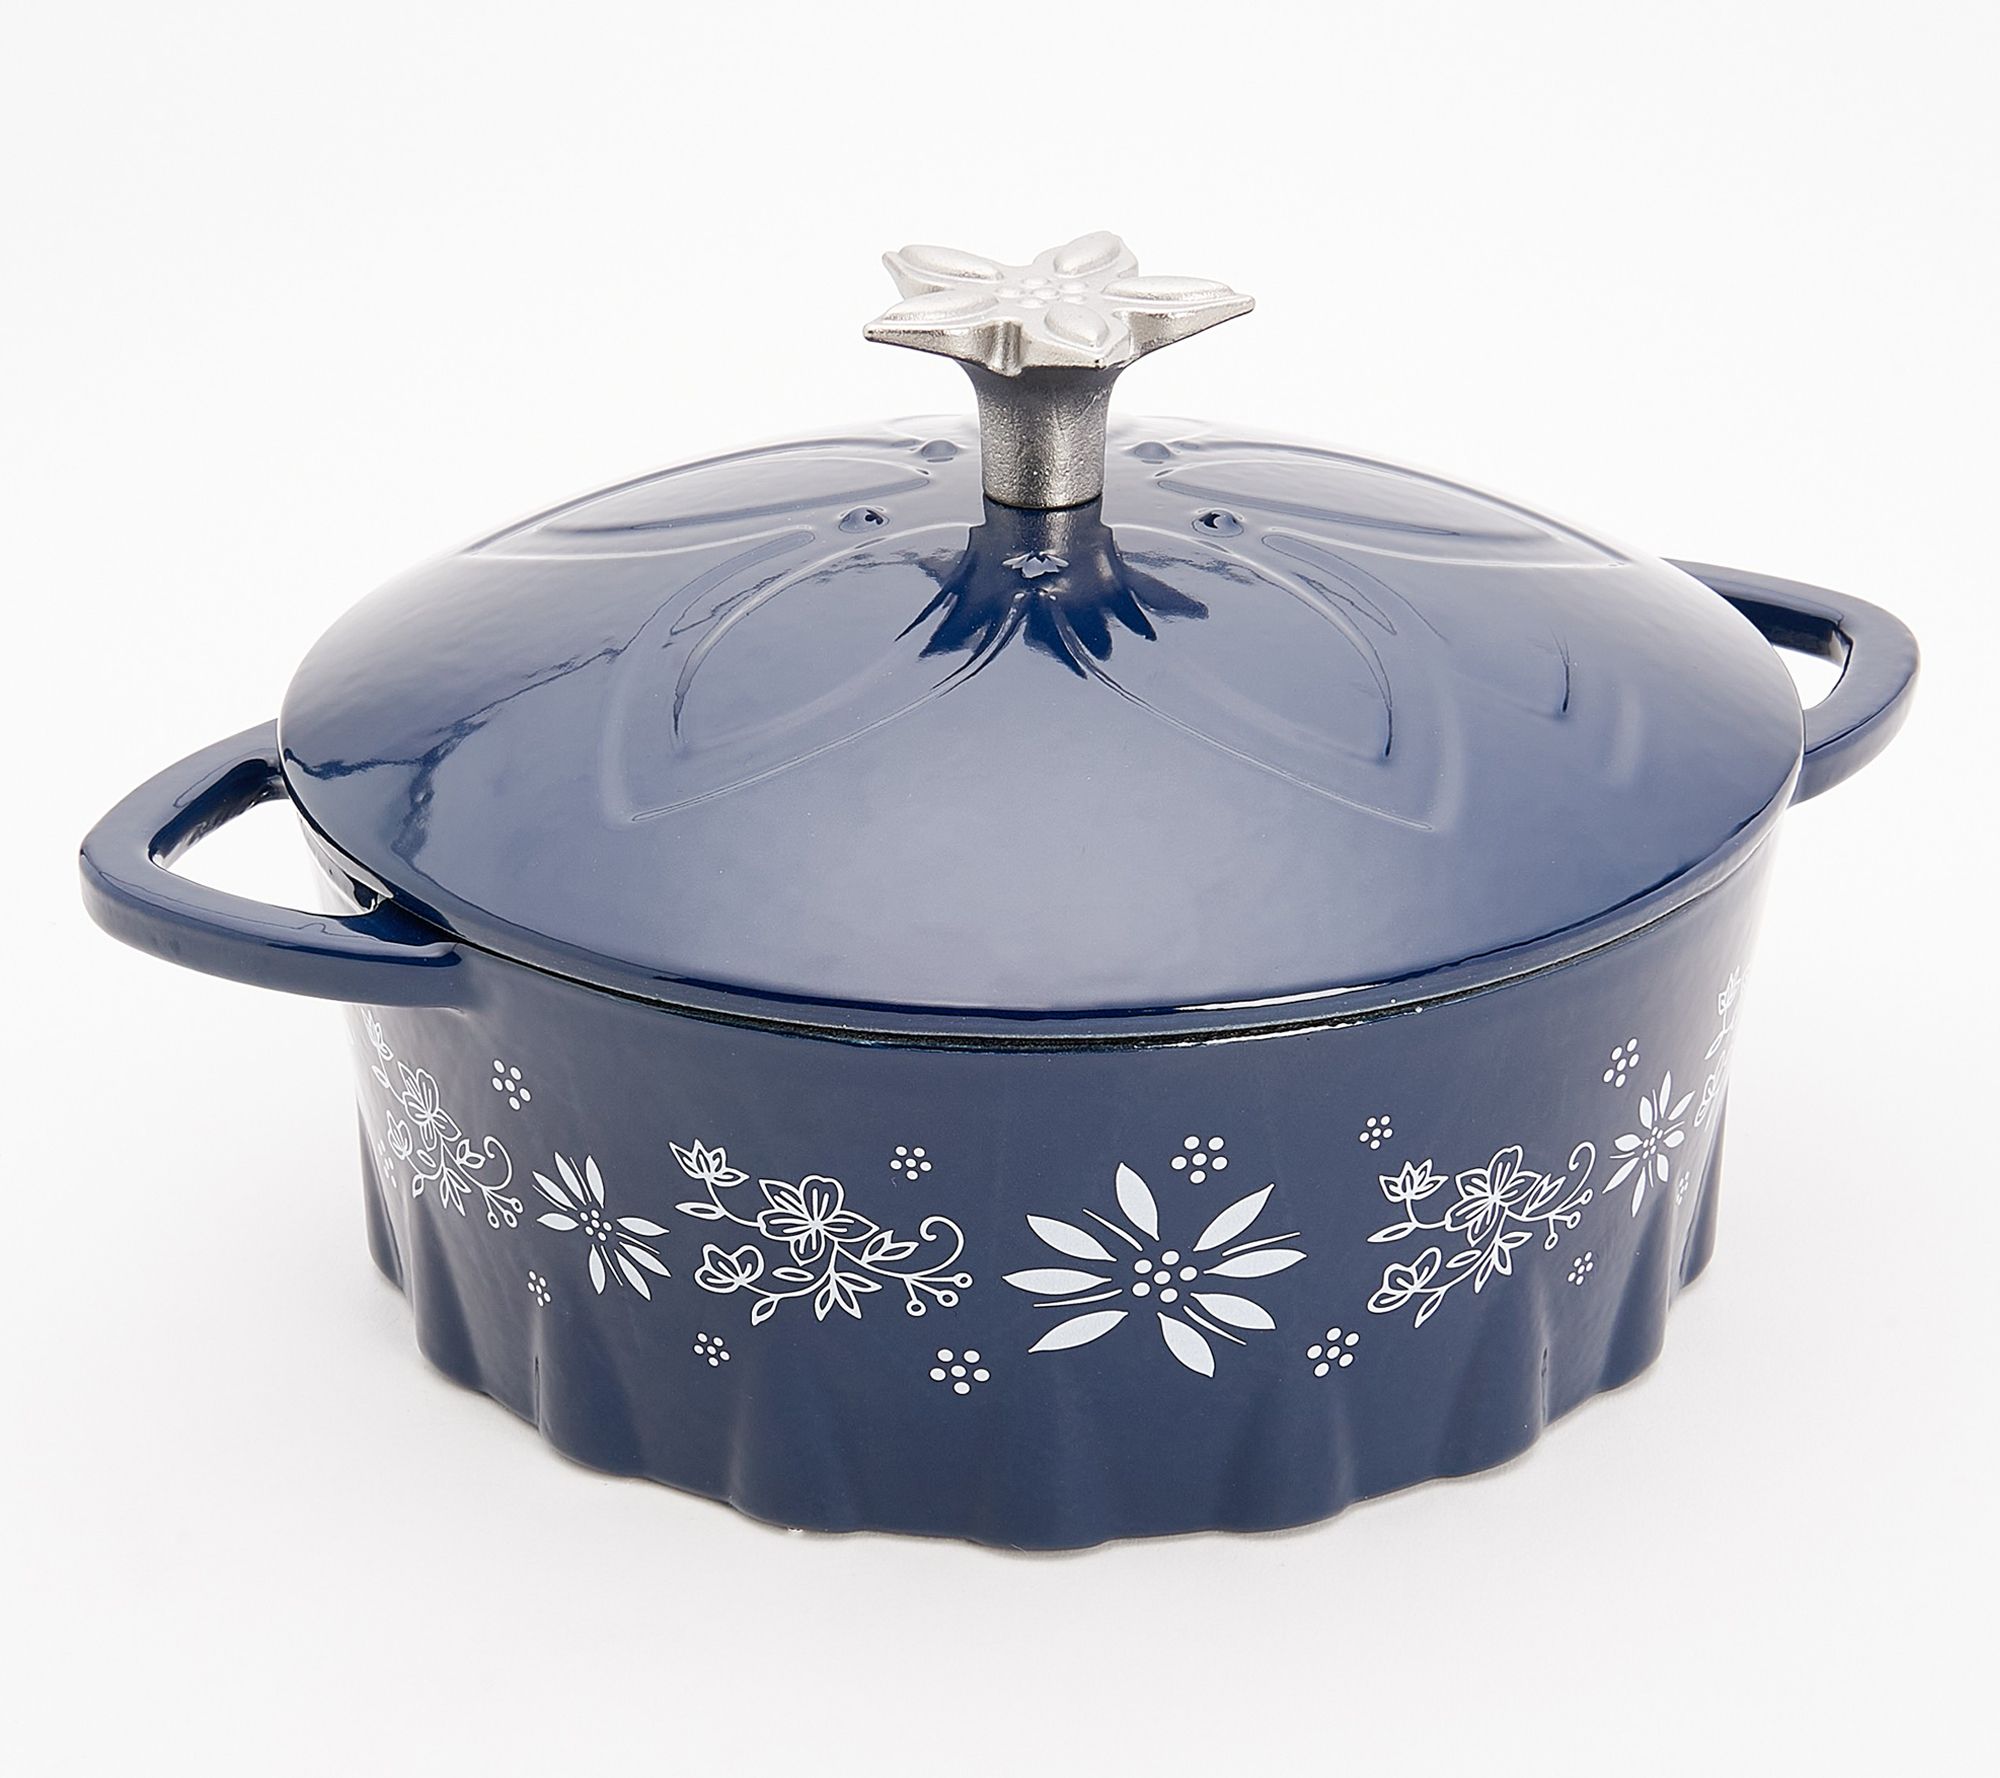 Outset Enameled Cast Iron Blue Pot Dutch Oven With Lid